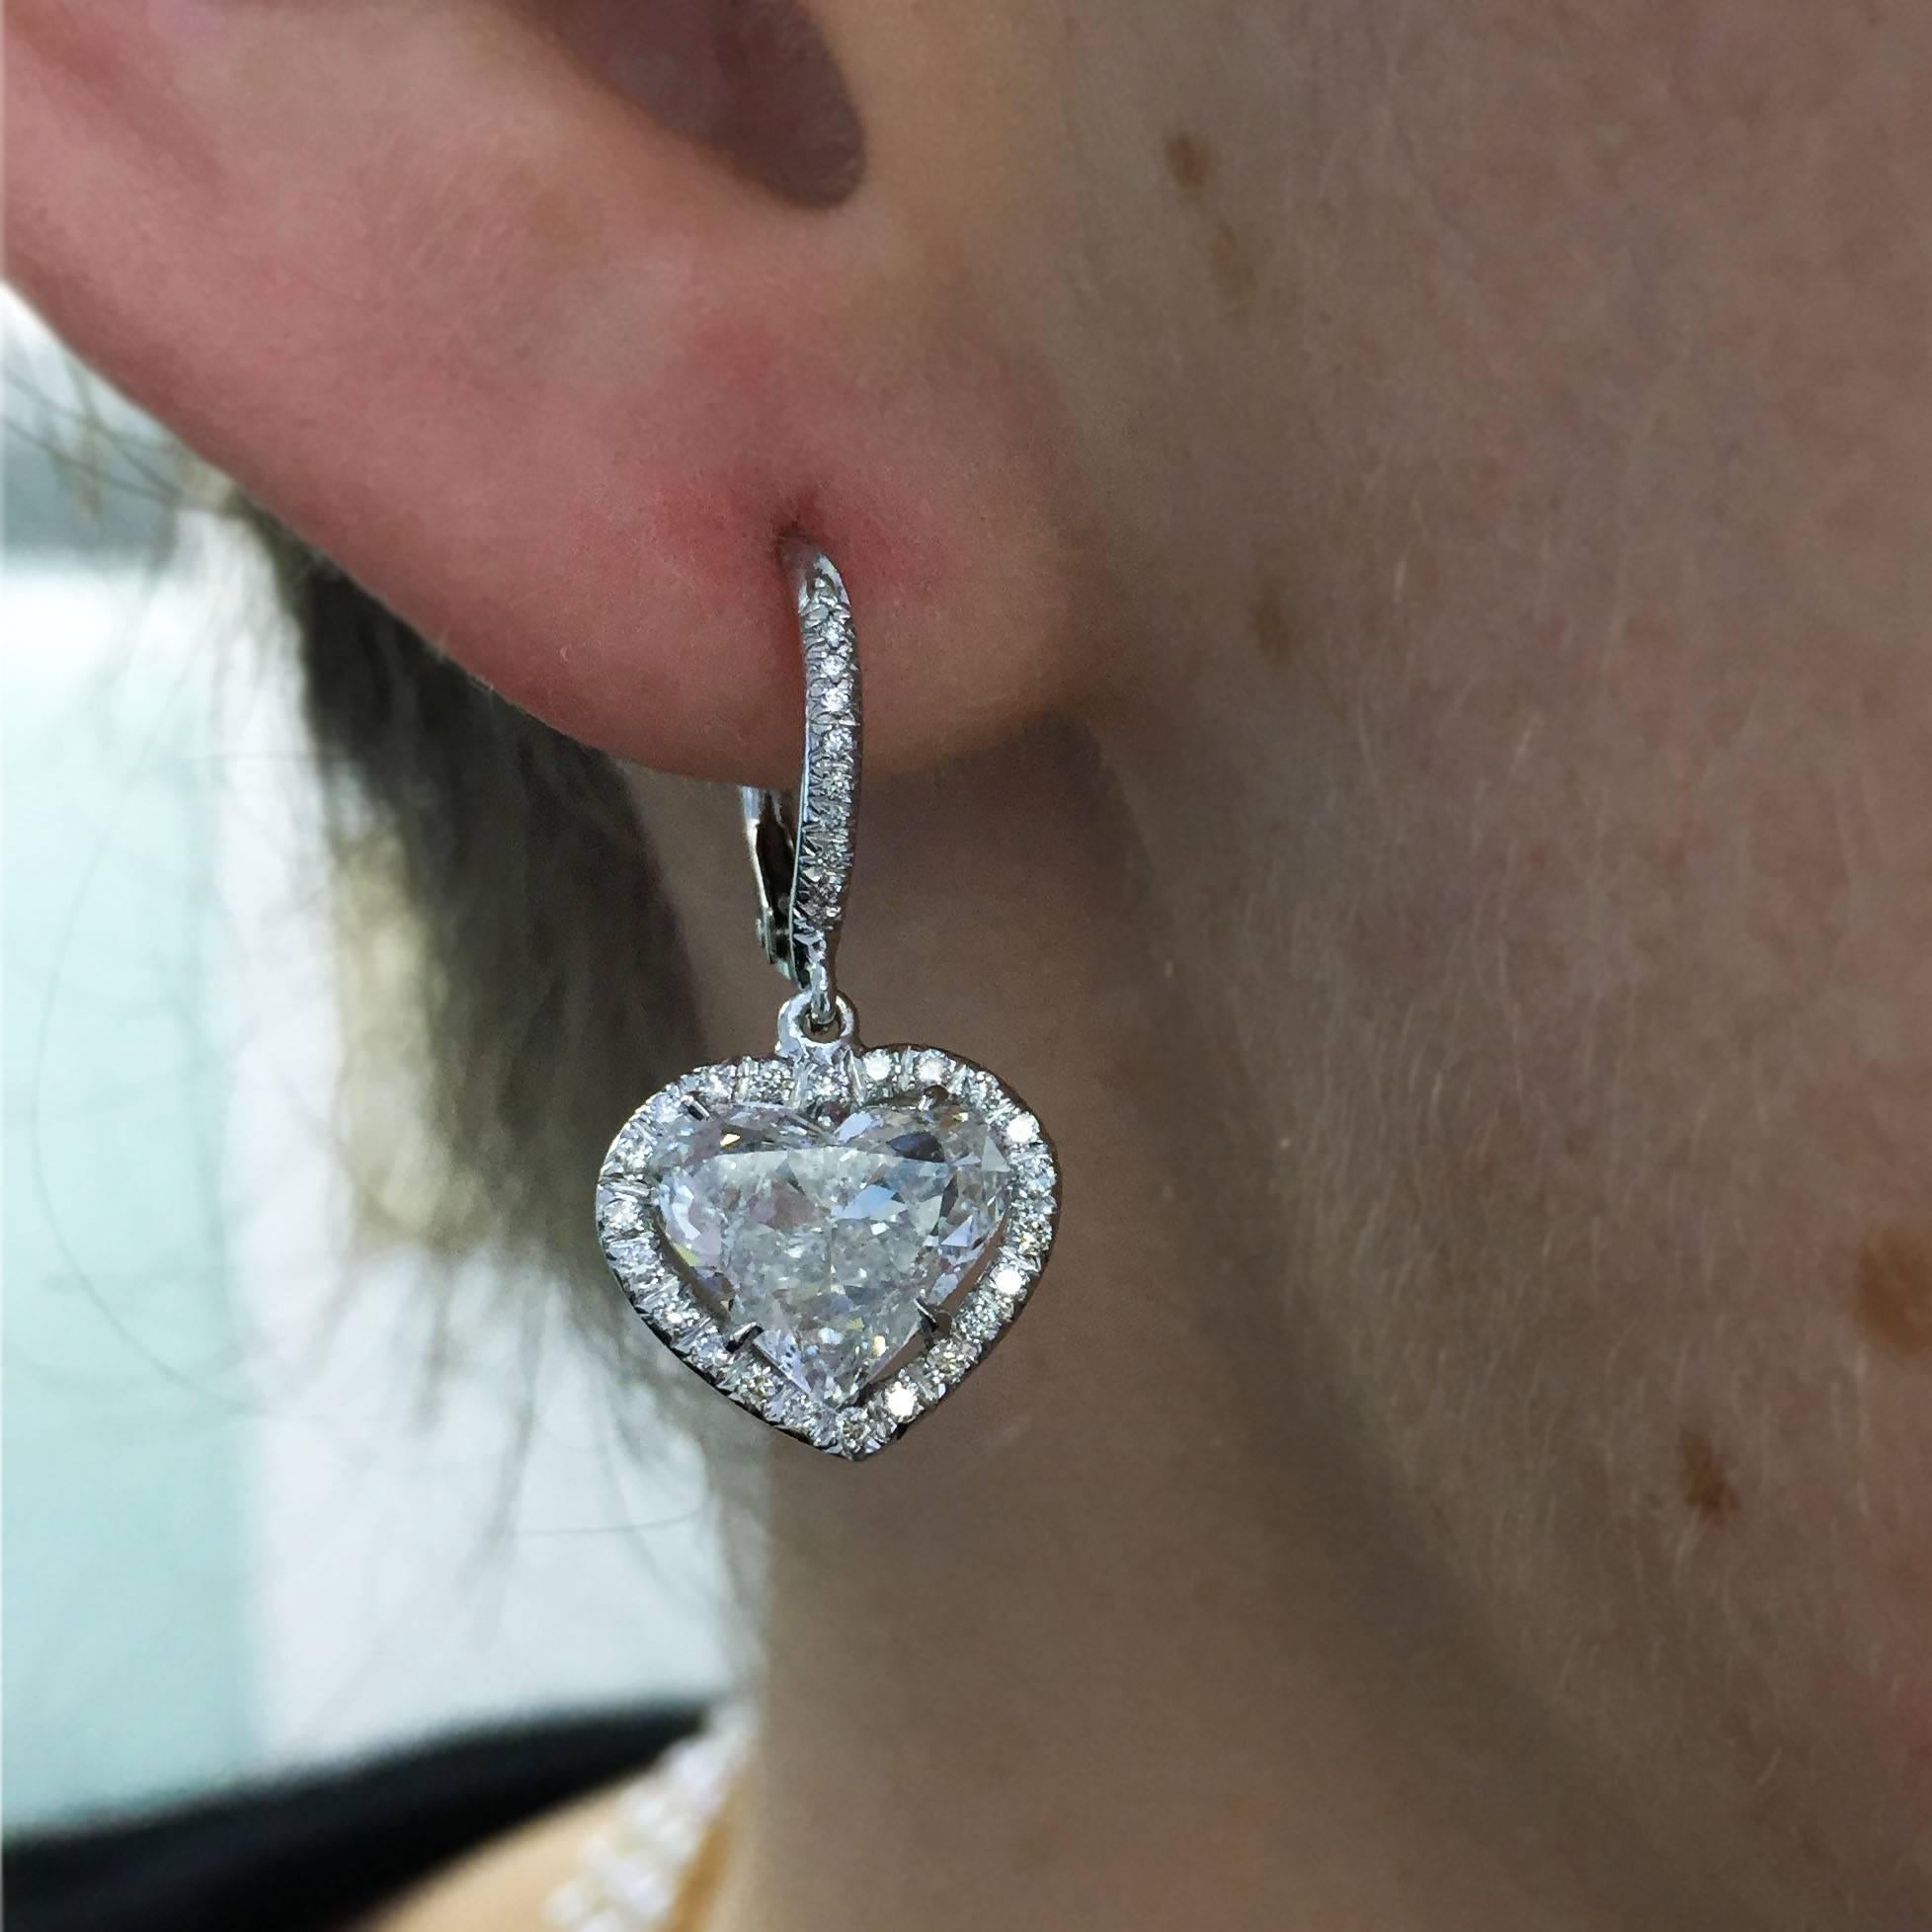 The perfect gift for your Valentine! A sweet pair of 18k white gold earrings features two heart-shaped diamonds prong set in a pave halo frame and suspended from a pave wire. The diamonds weigh 1.70 carats and 1.81 carats, while the earrings are set